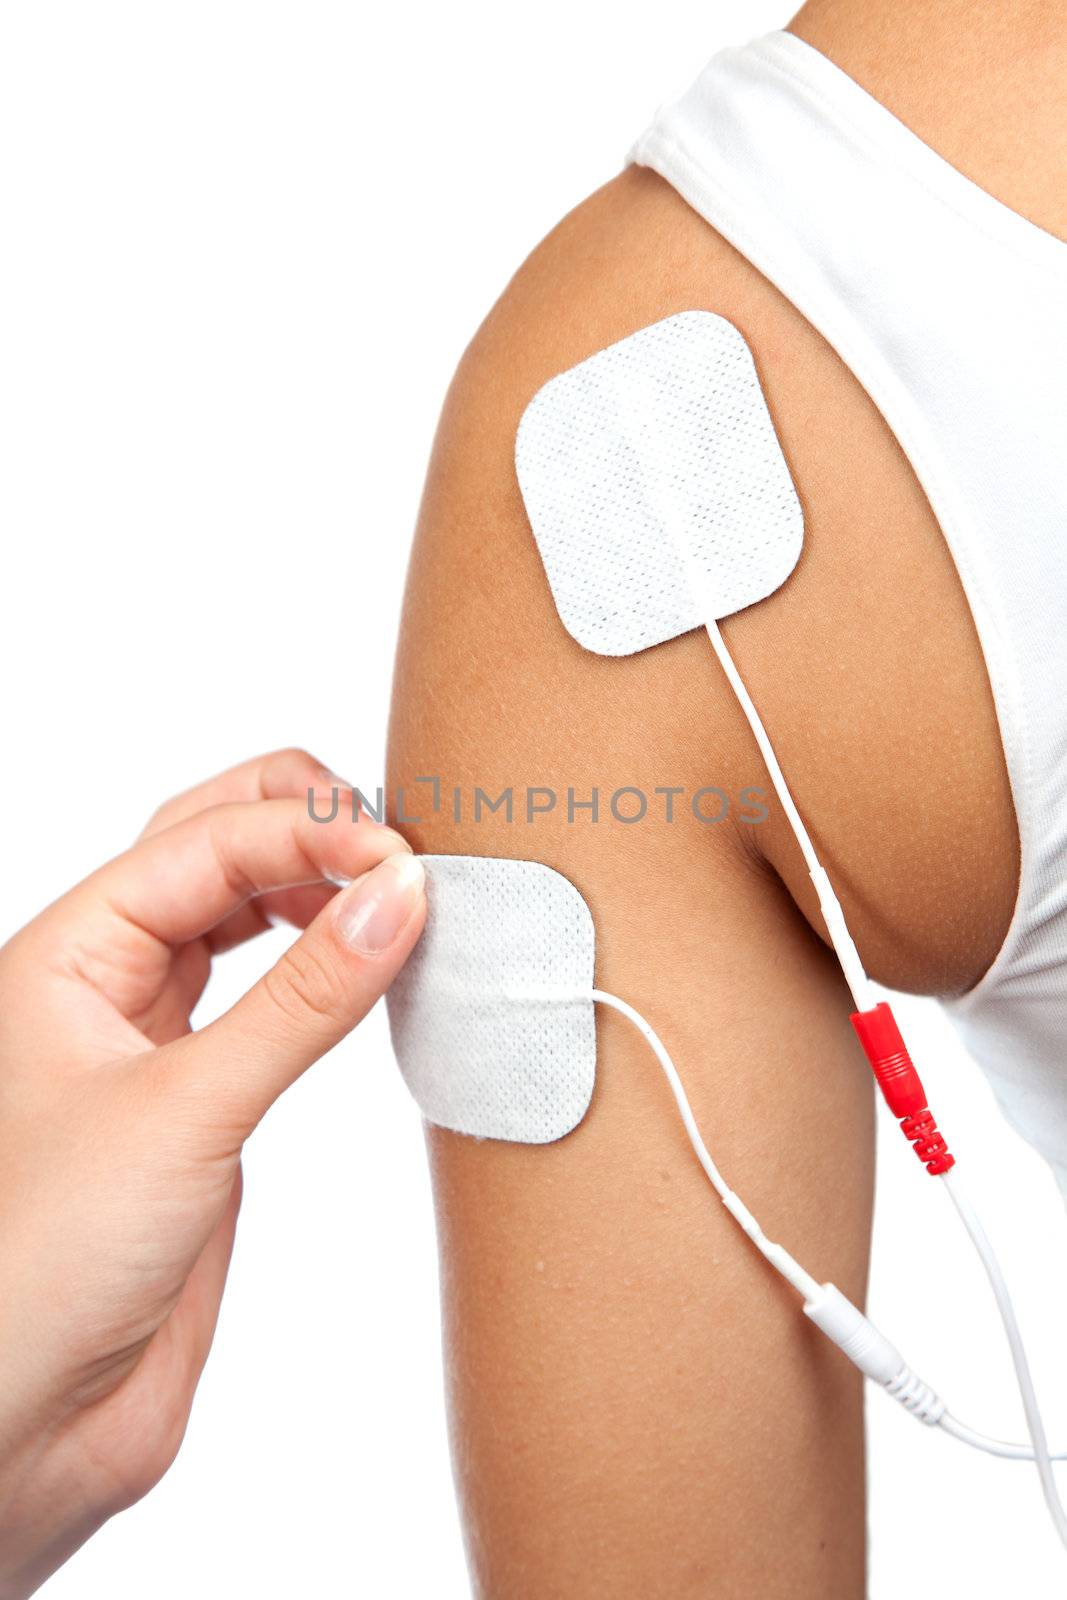 electrodes of tens device on shoulder, tens therapy, nerve stimu by motorolka